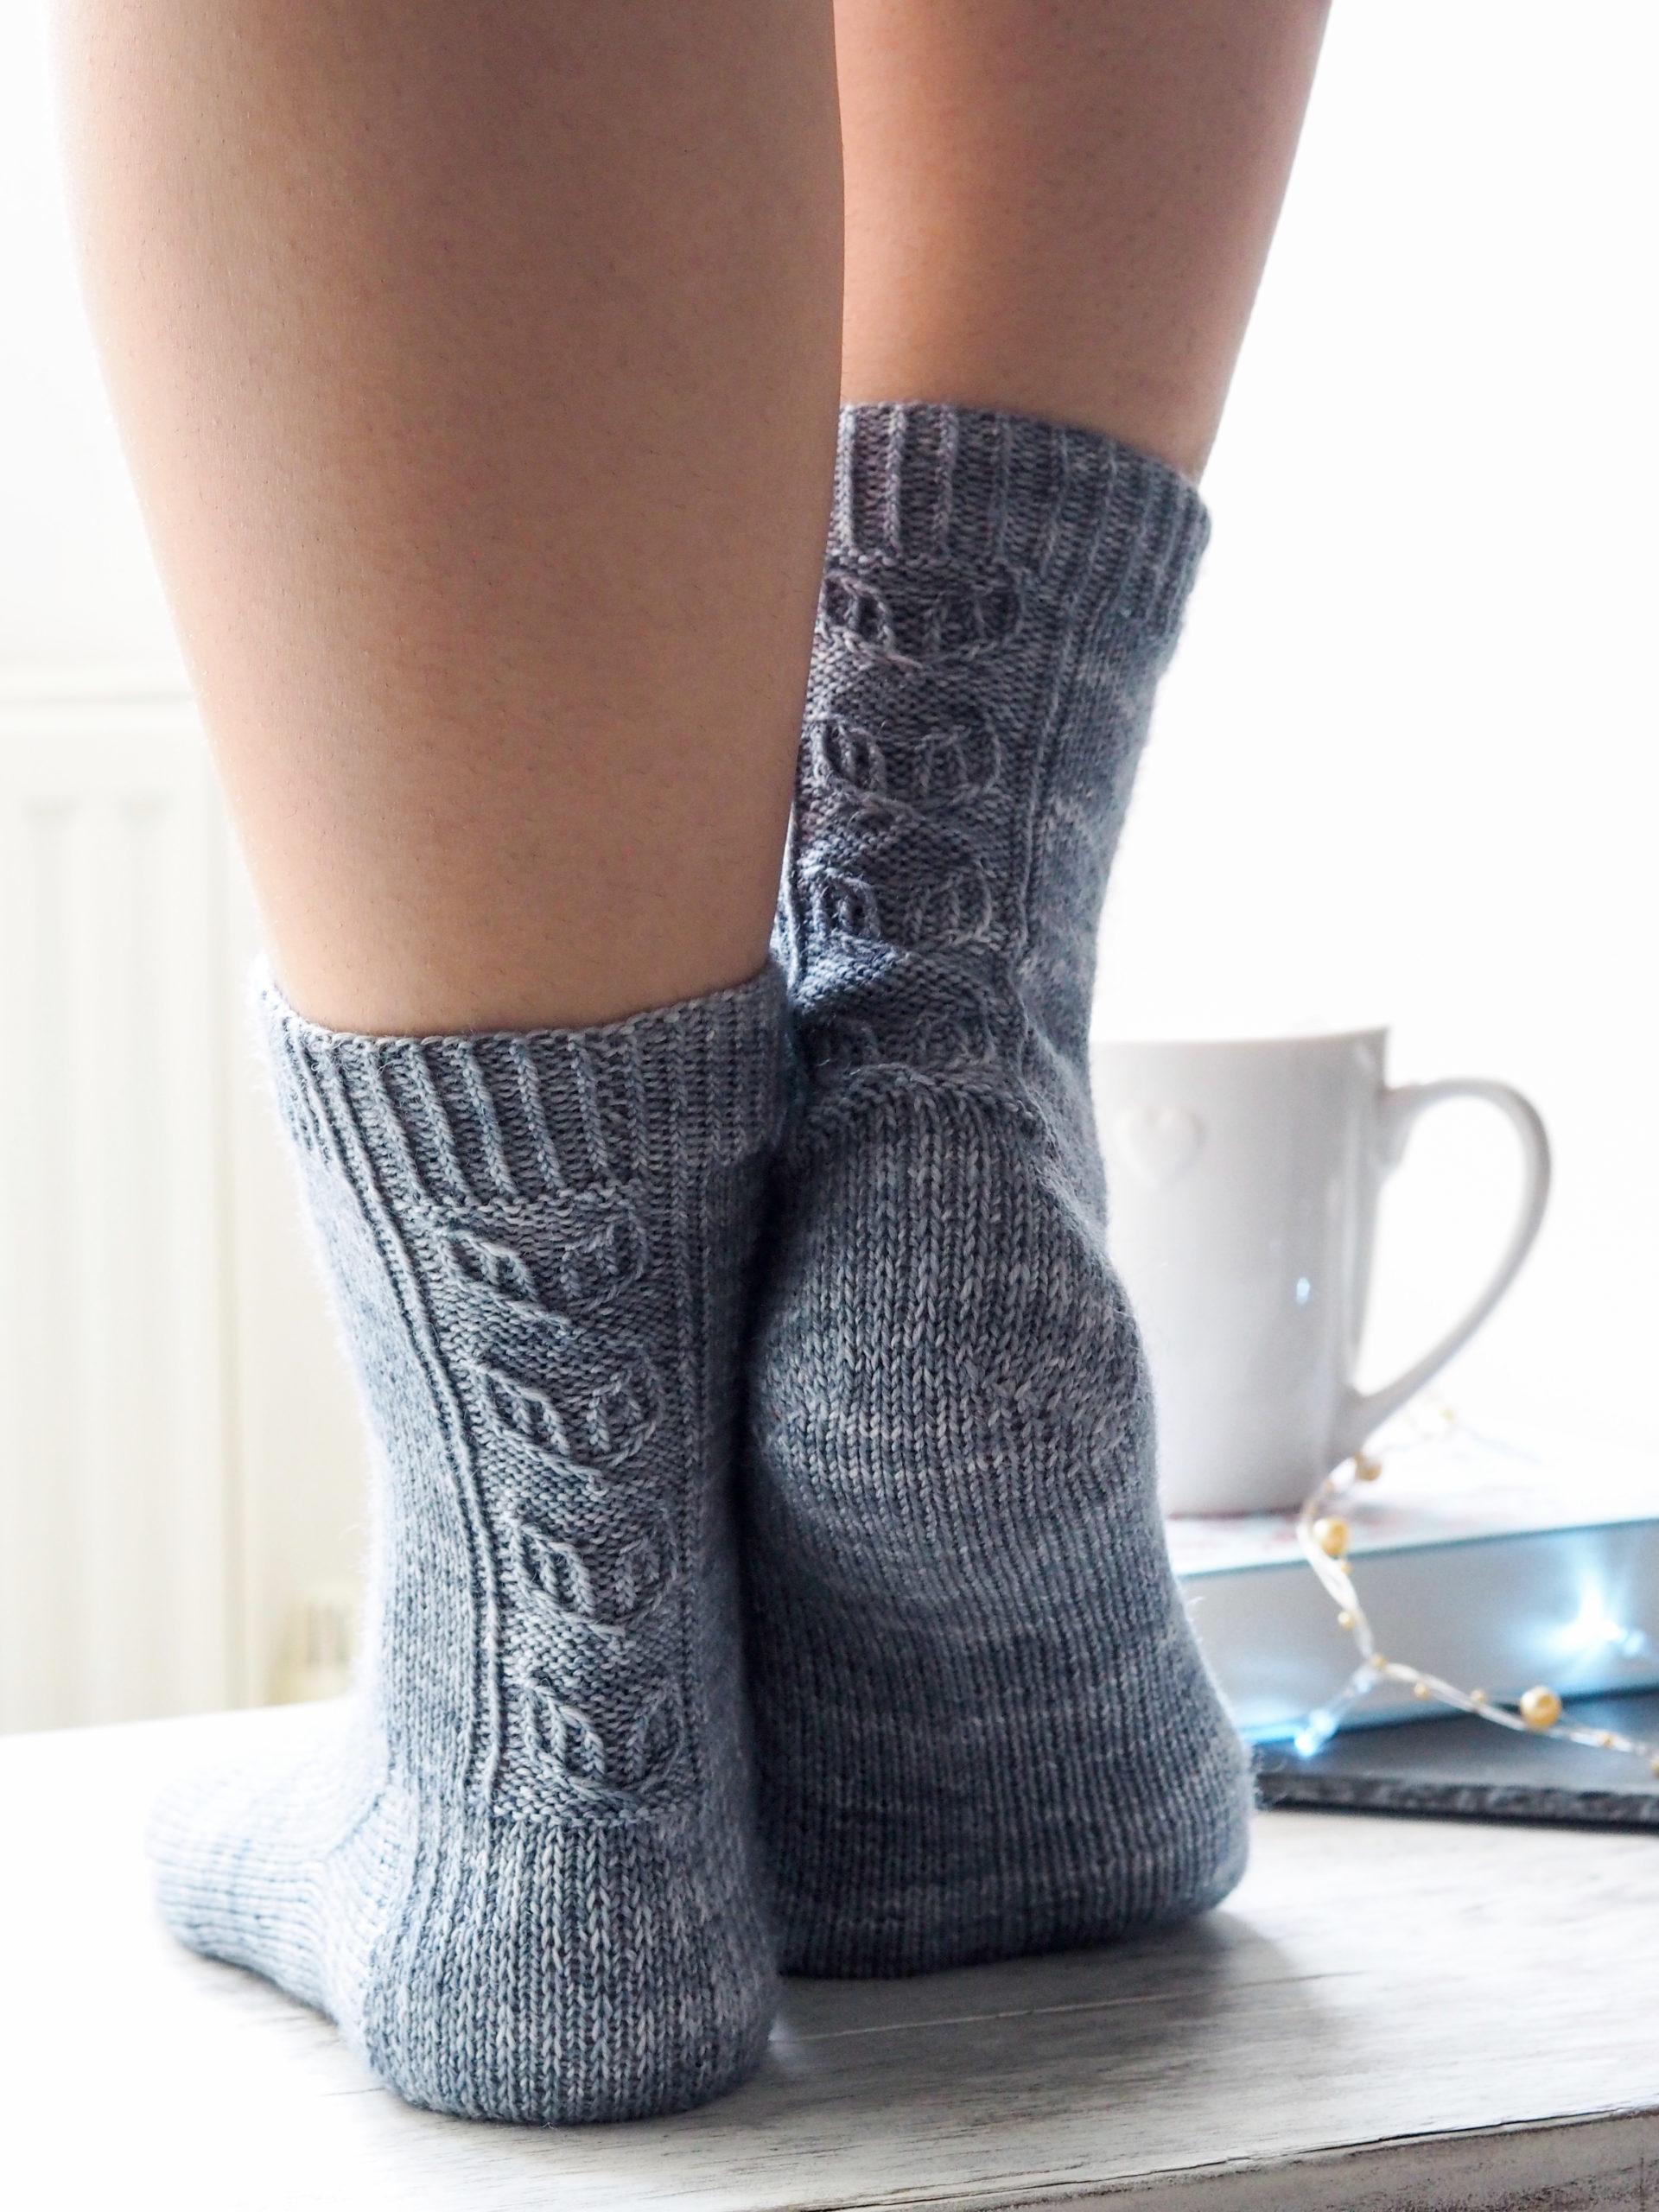 Ravelry: Pilates or Yoga Socks pattern by Claire Herne